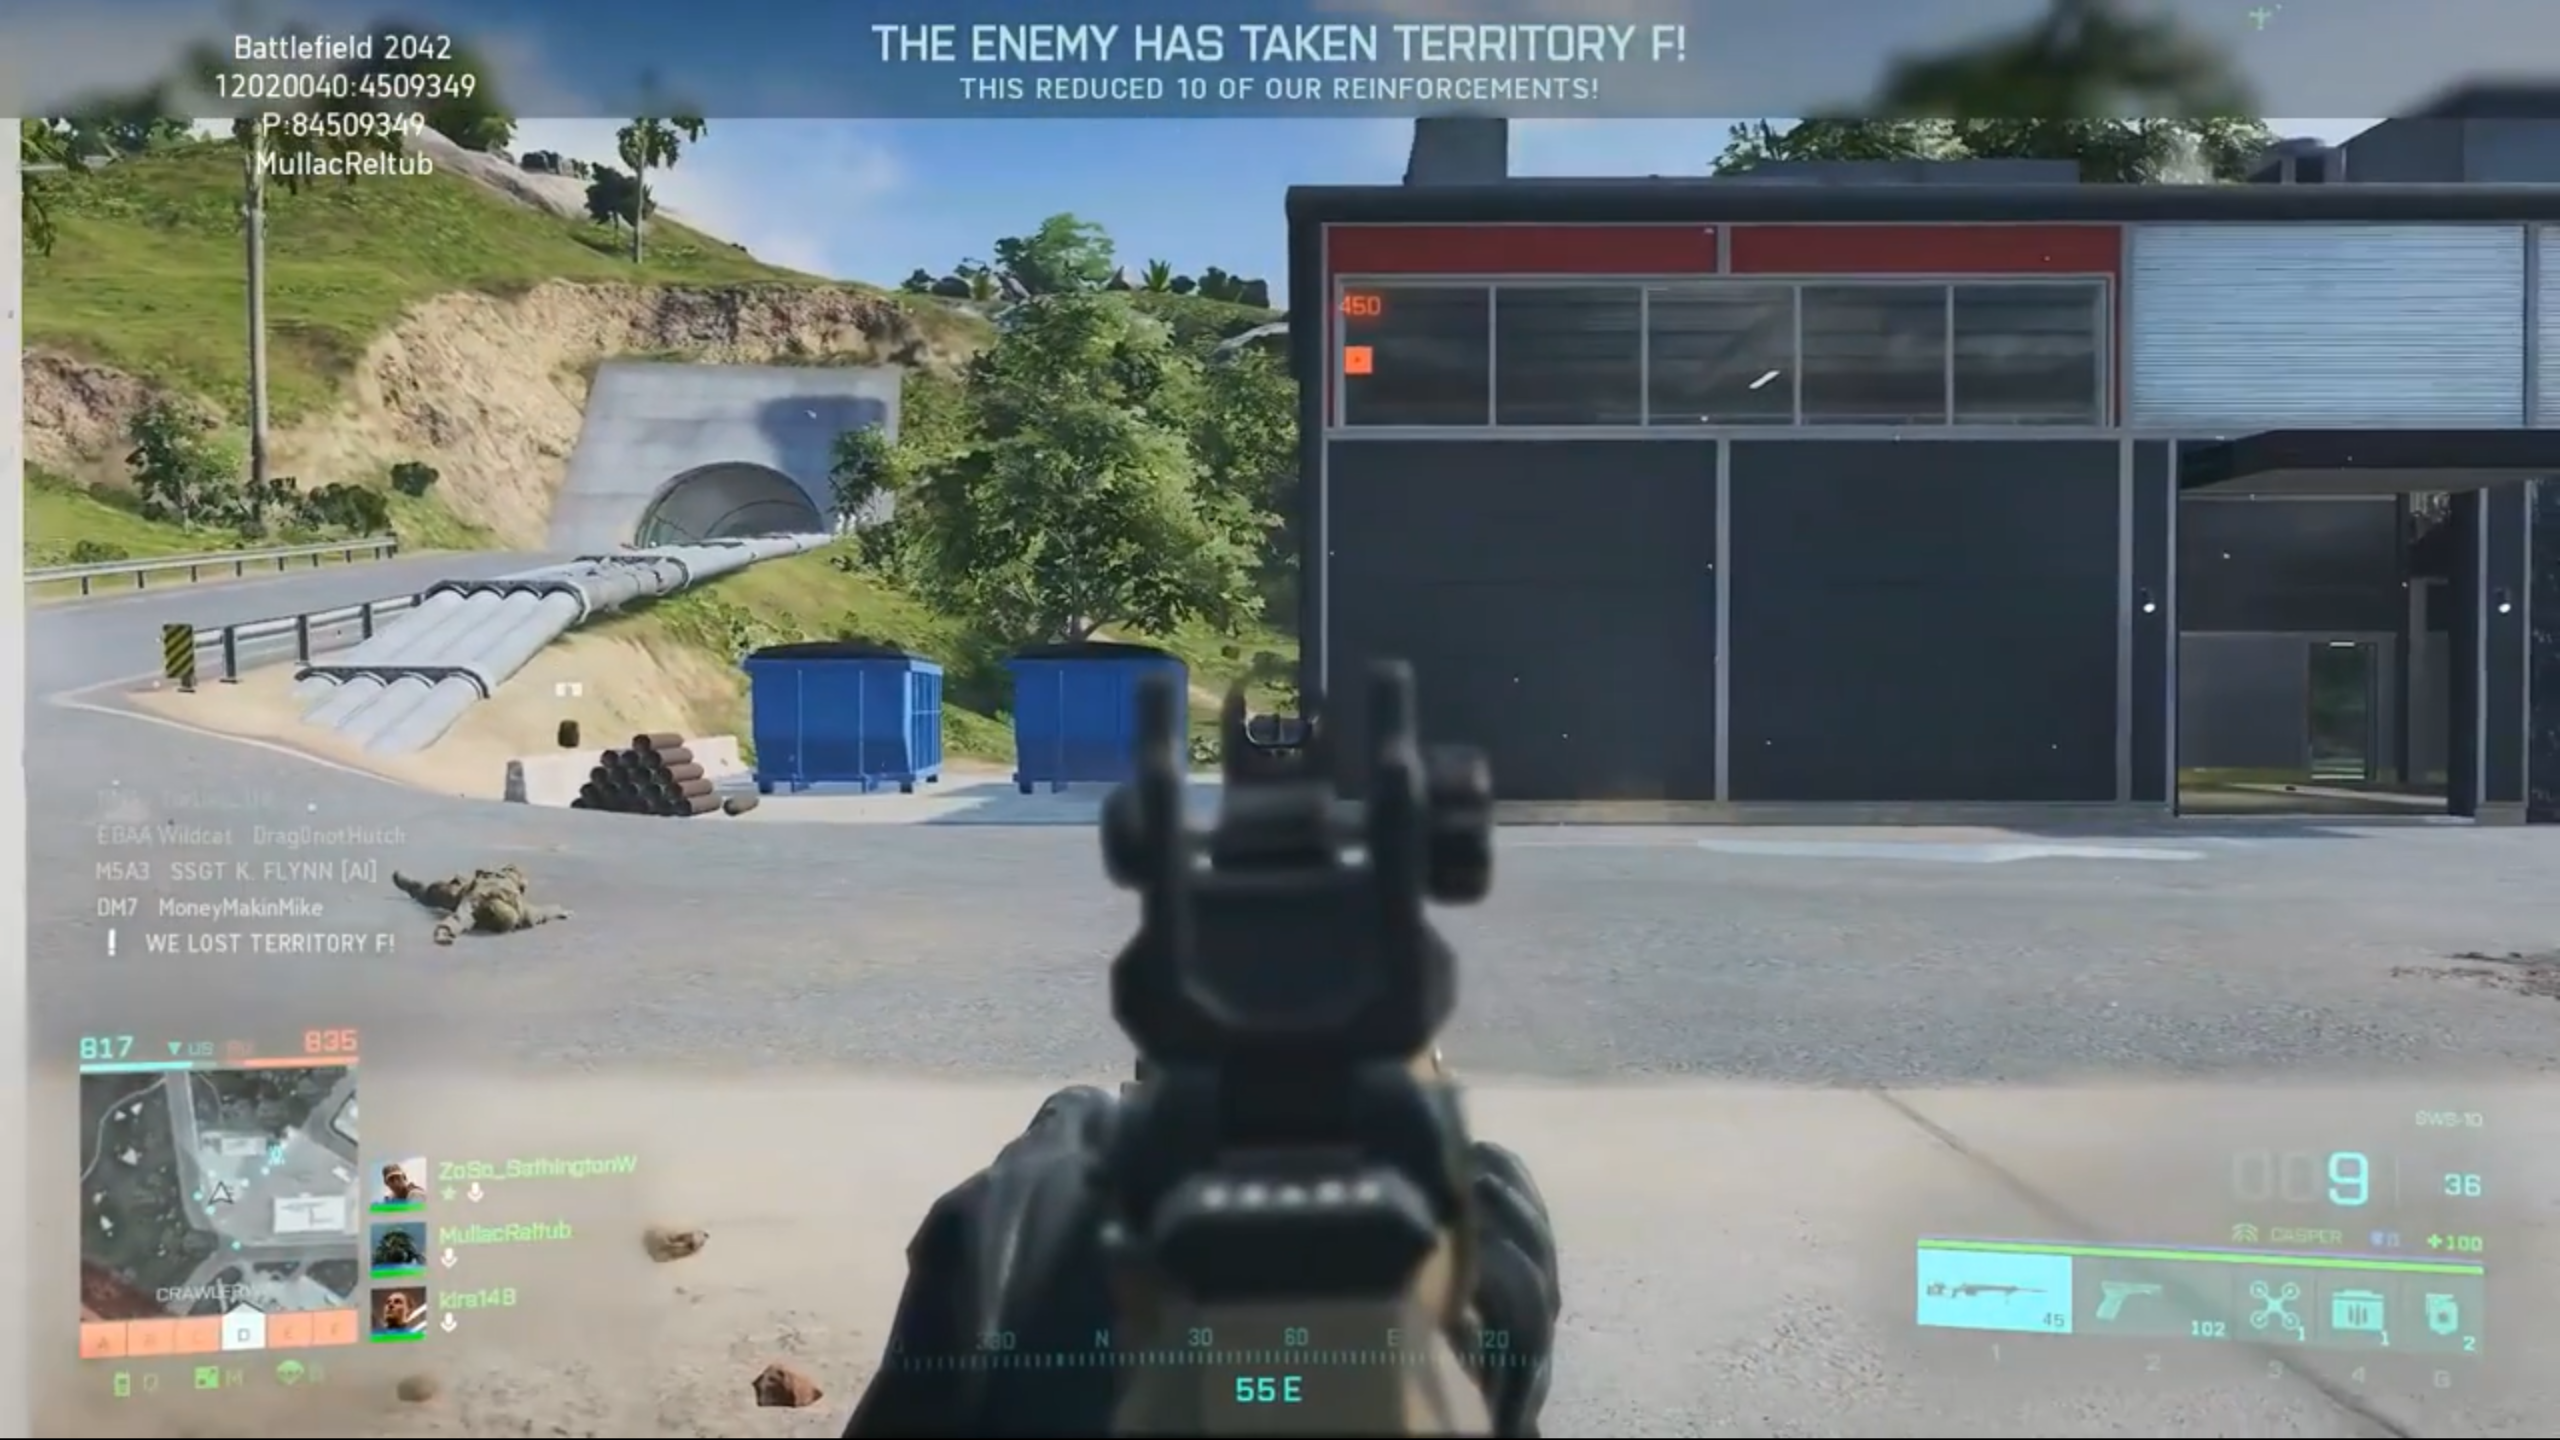 30 mins more Battlefield 2042 gameplay has leaked from the private playtest